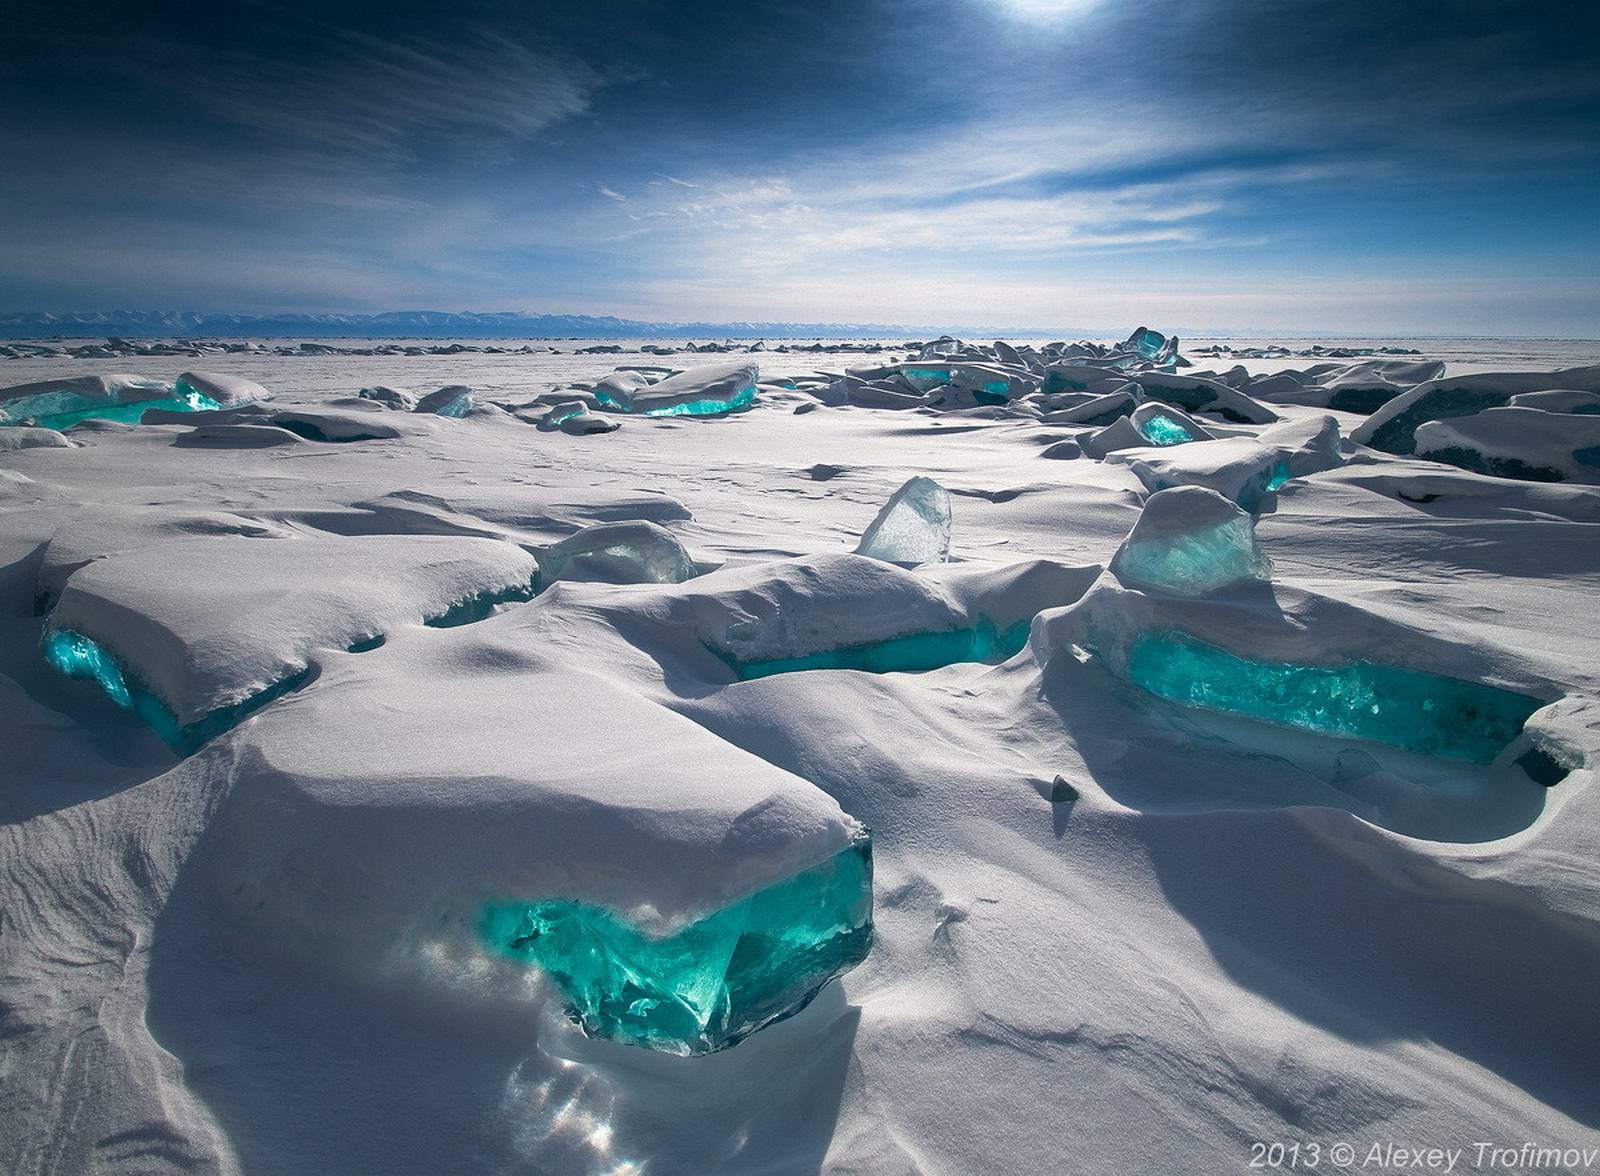 southern Russian region of Siberia. Lake Baikal is one of the worlds largest and oldest freshwater lakes.Where turquoise shards sit on top creating a beautiful spectacle